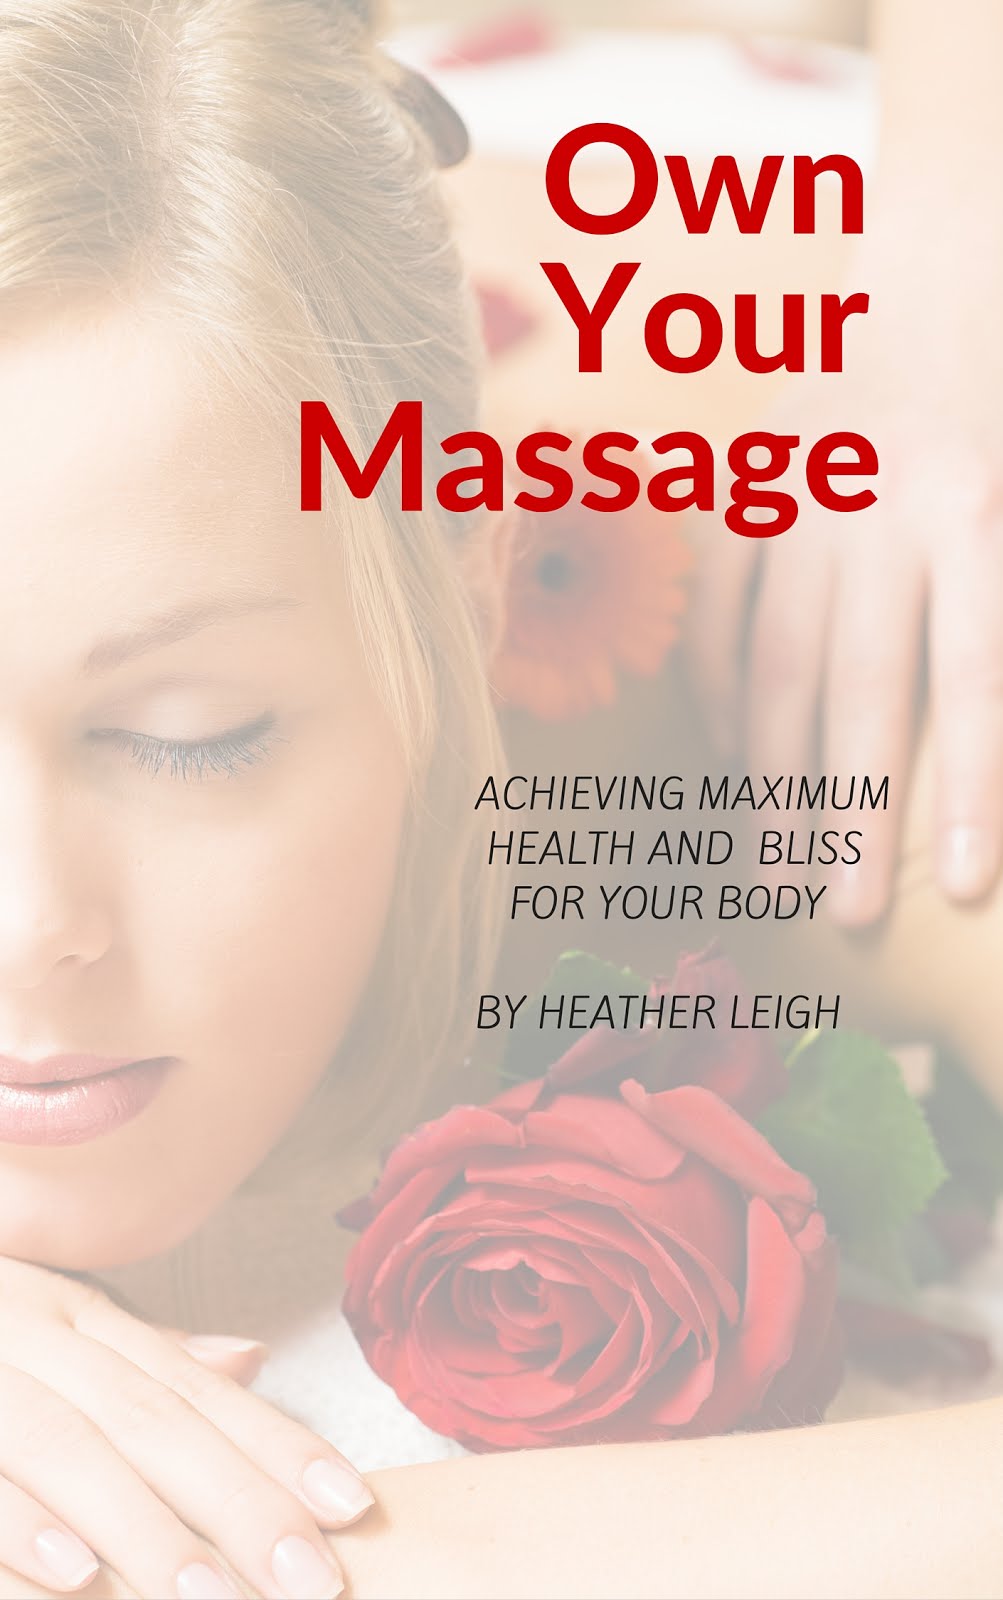 Getting the most out of your massage.